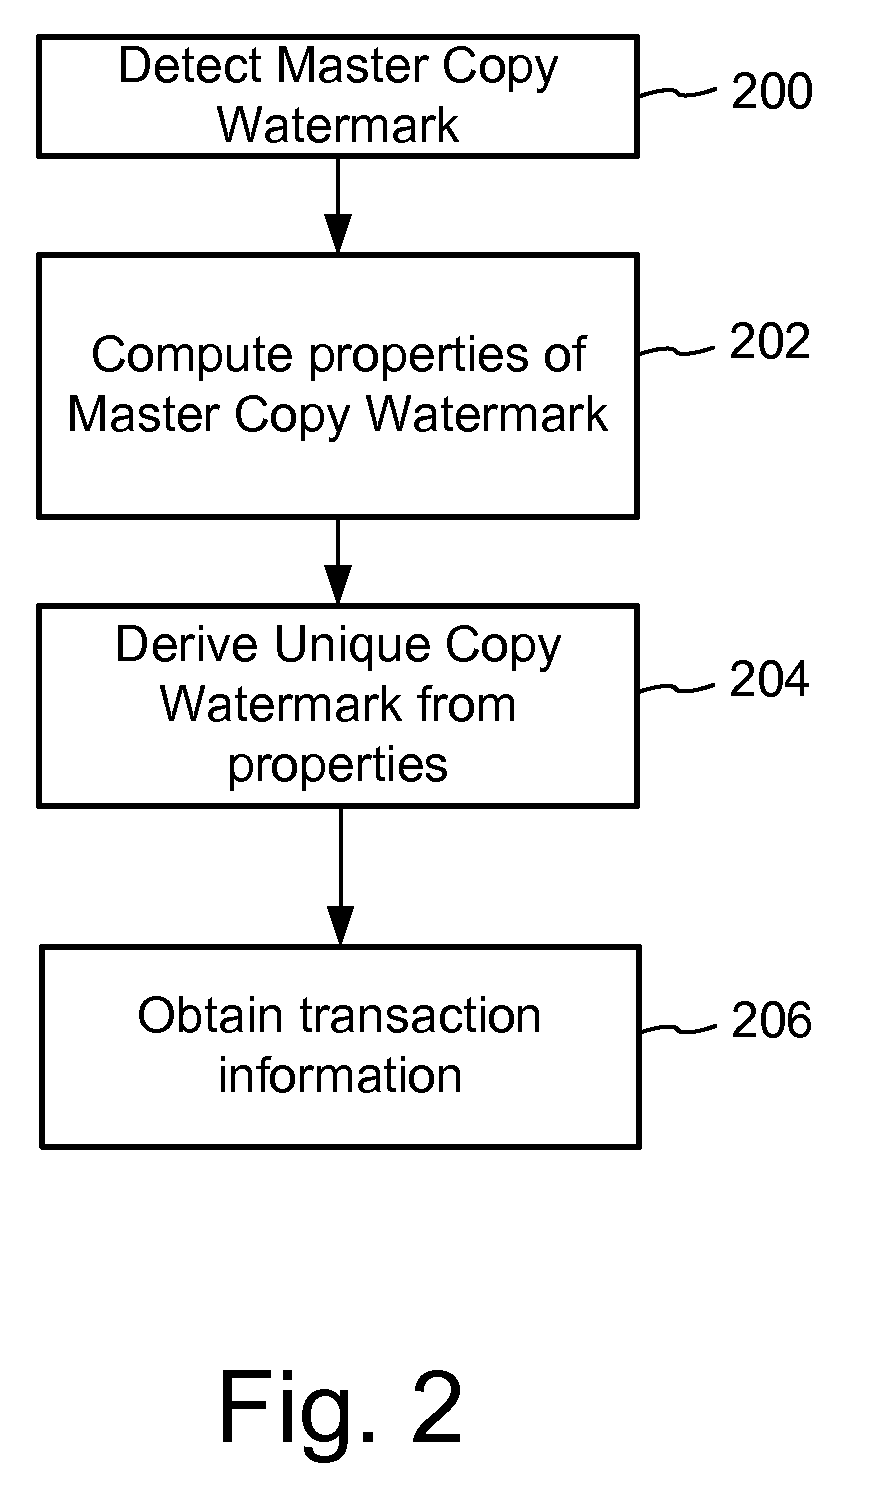 Content Serialization by Varying Content Properties, Including Varying Master Copy Watermark Properties